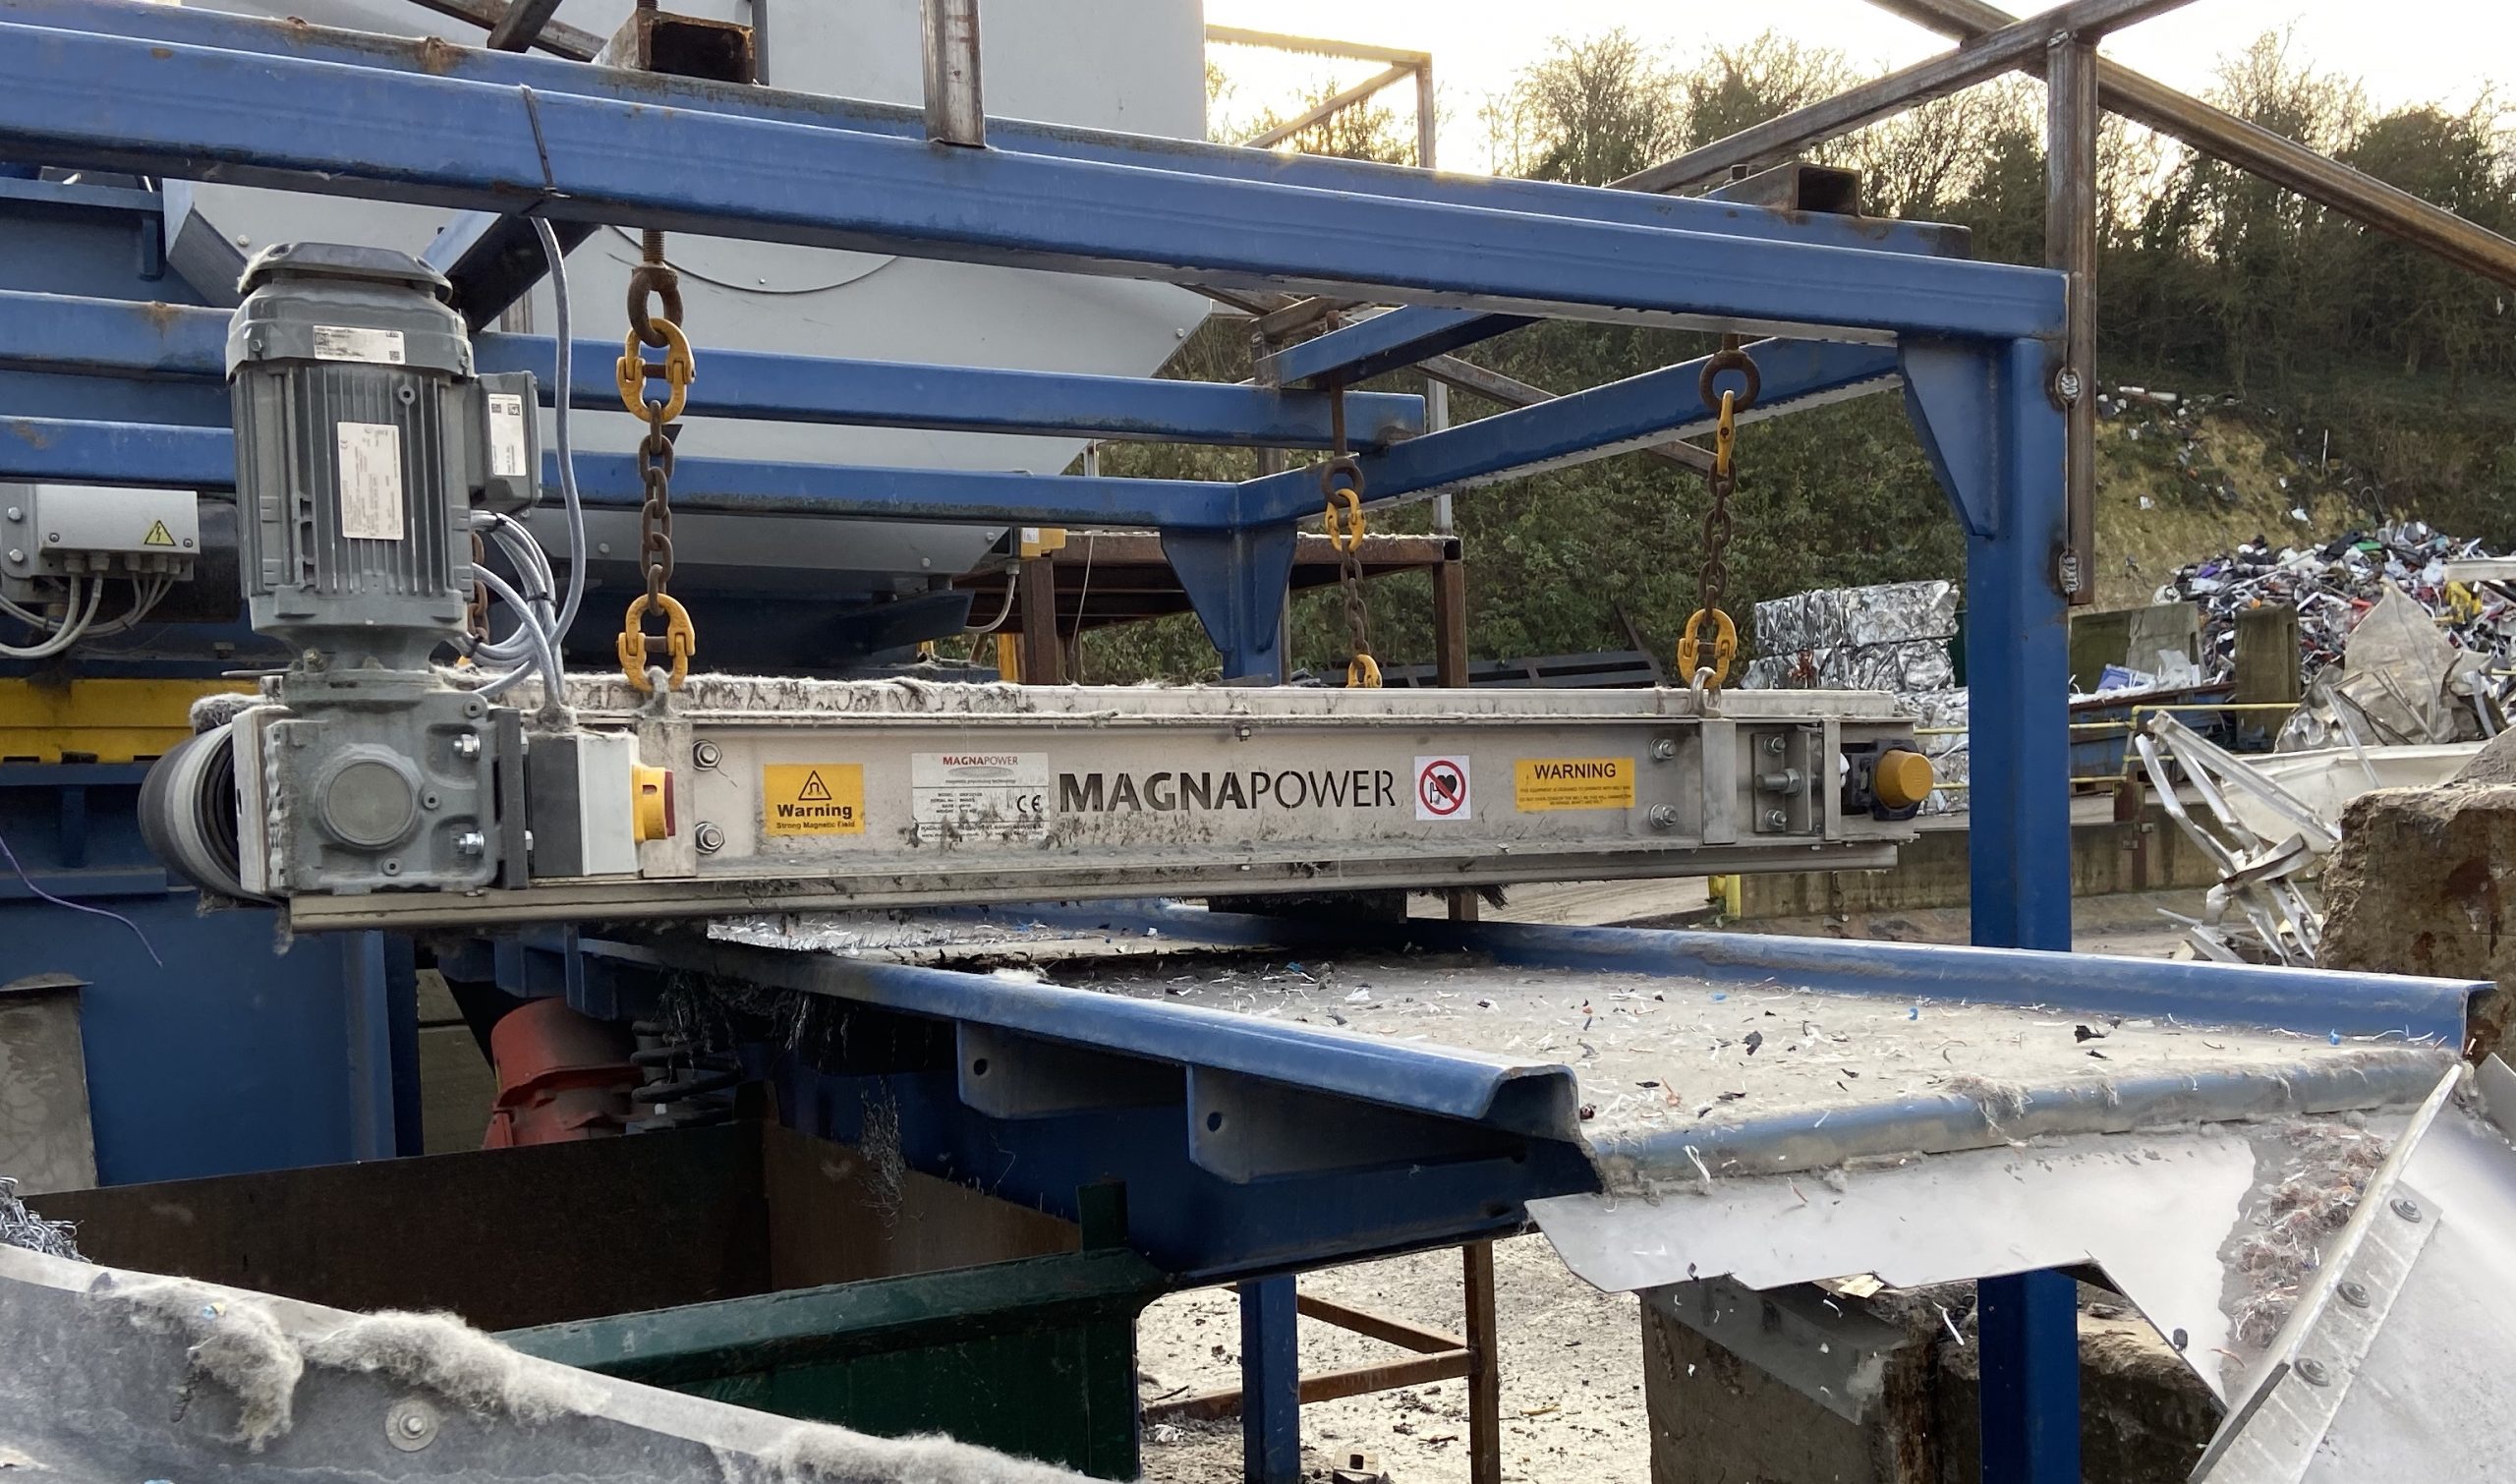 Crossbelt Electric Overband & Vibratory feeder removing steel from shredded cable - Magnapower